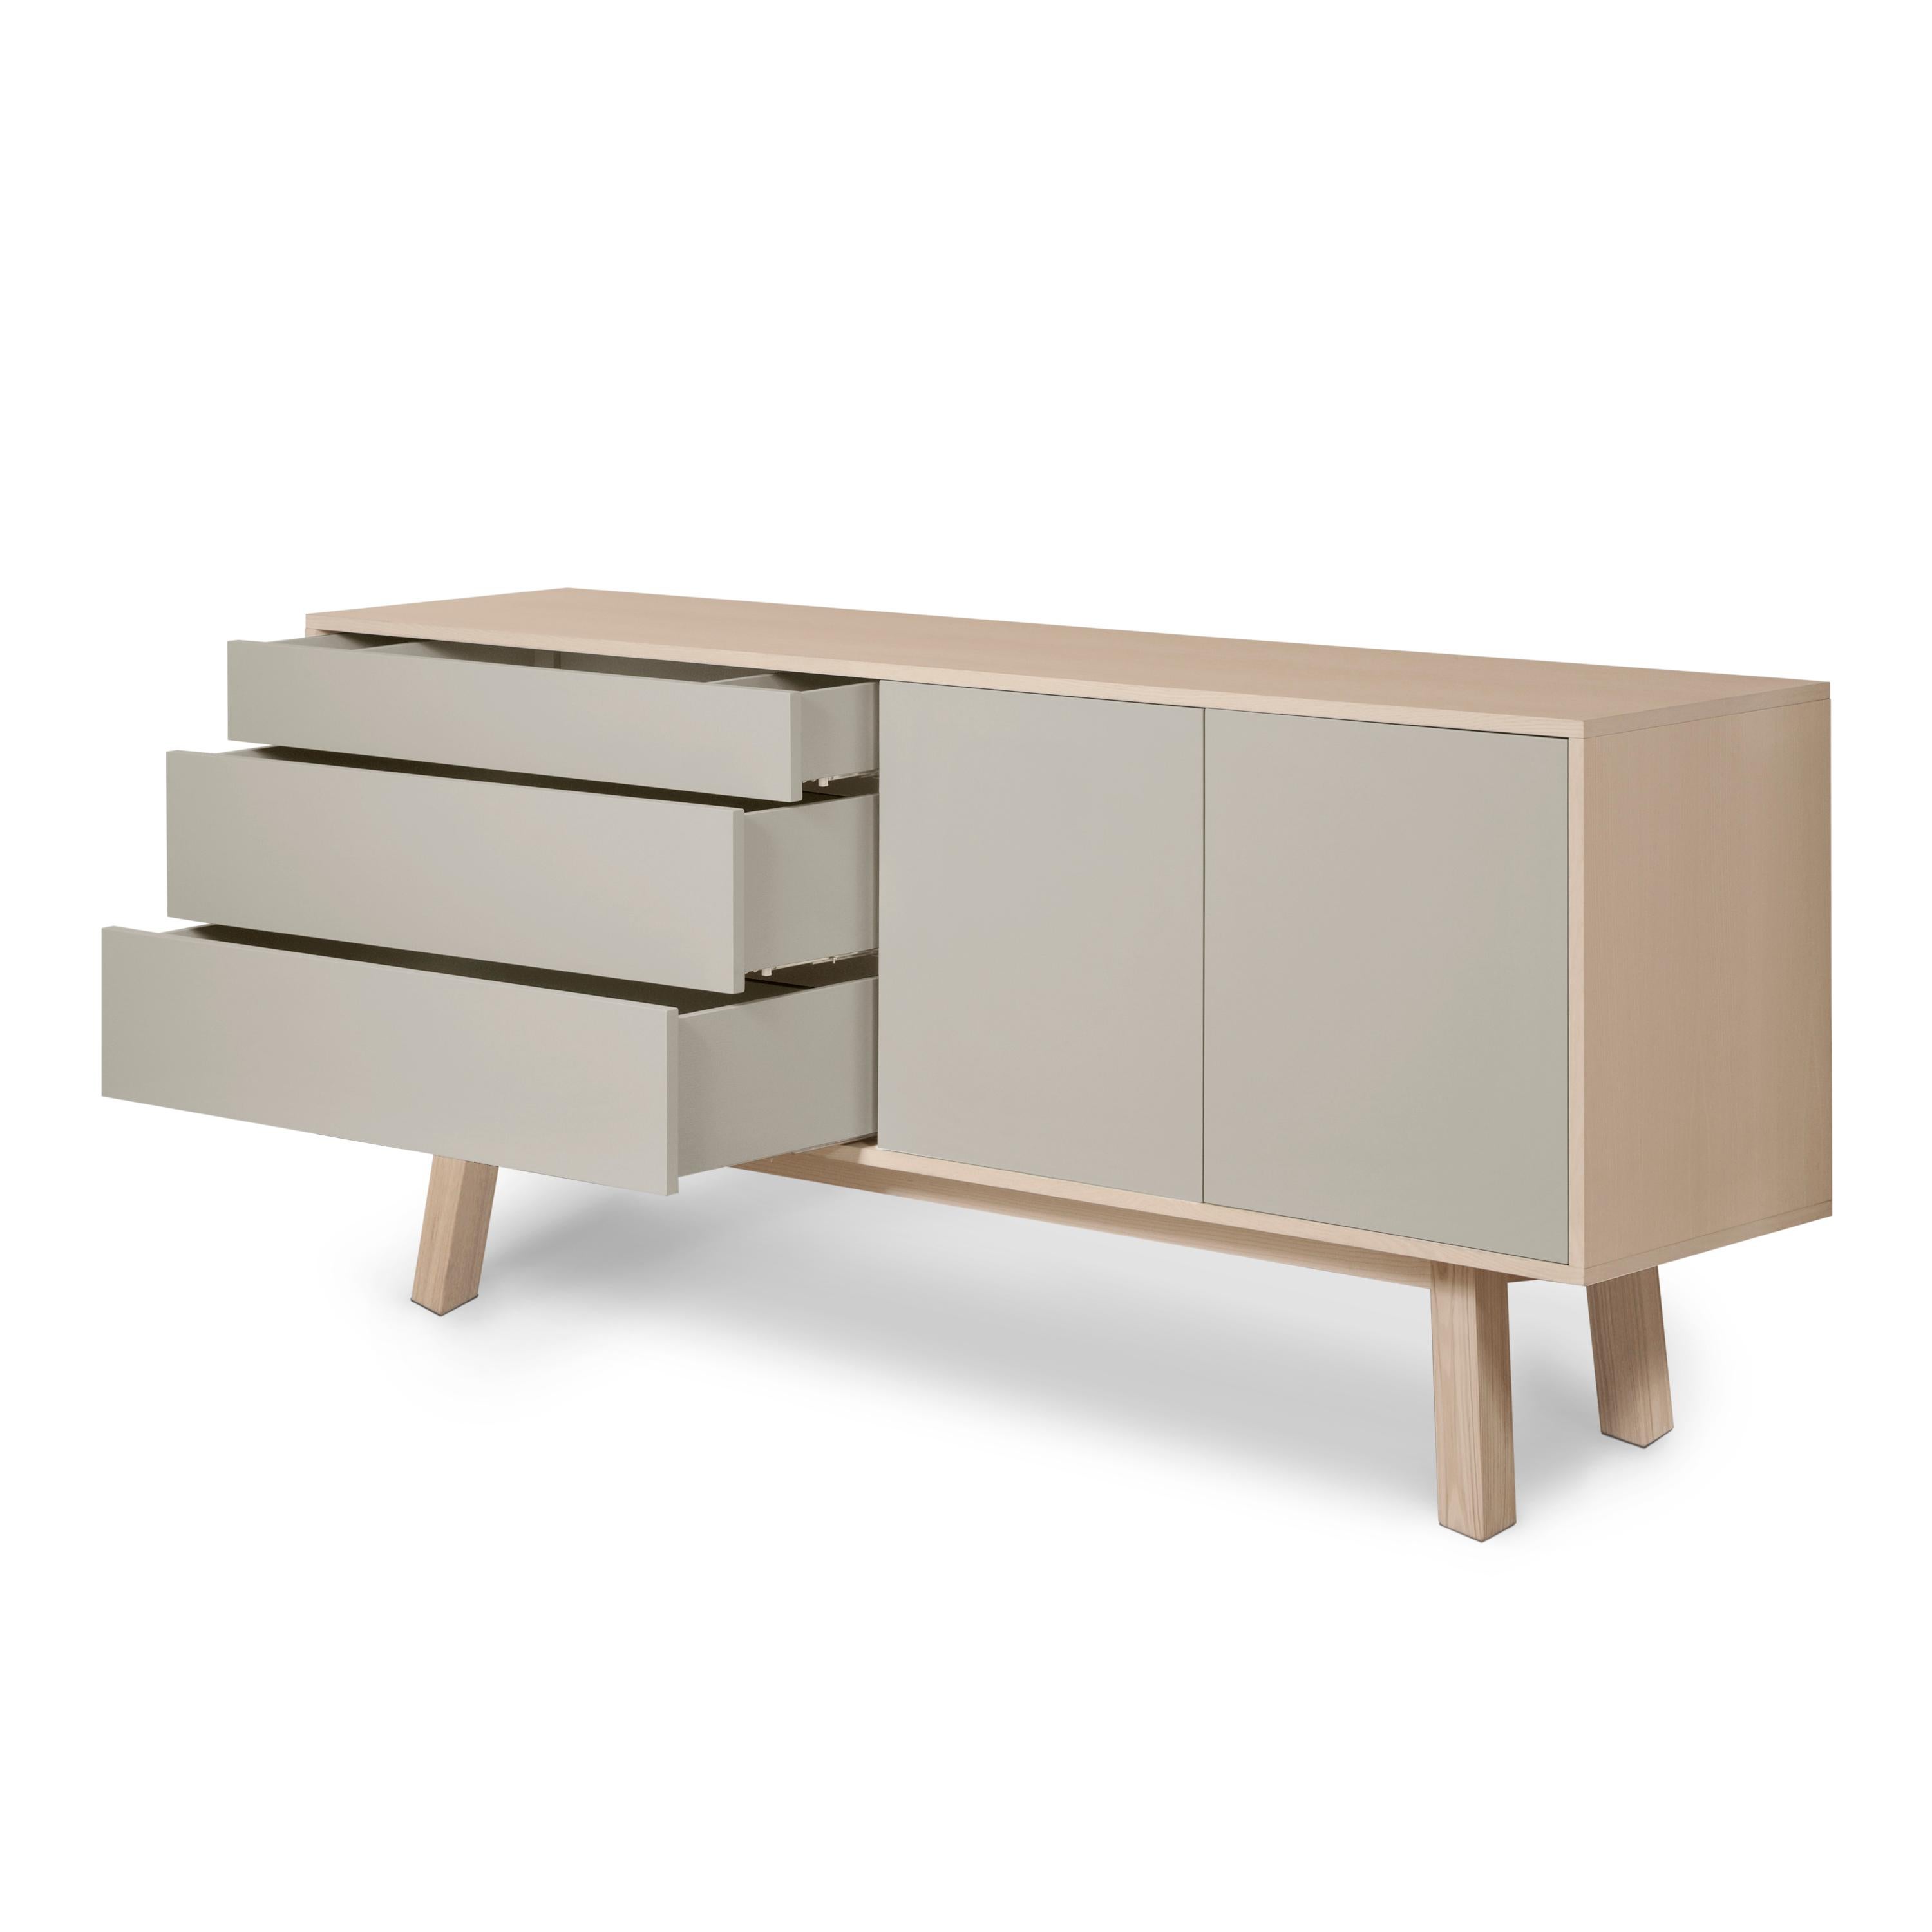 Ash Grey Higher Sideboard, scandinavian style, durable and PEFC- certified ash wood For Sale